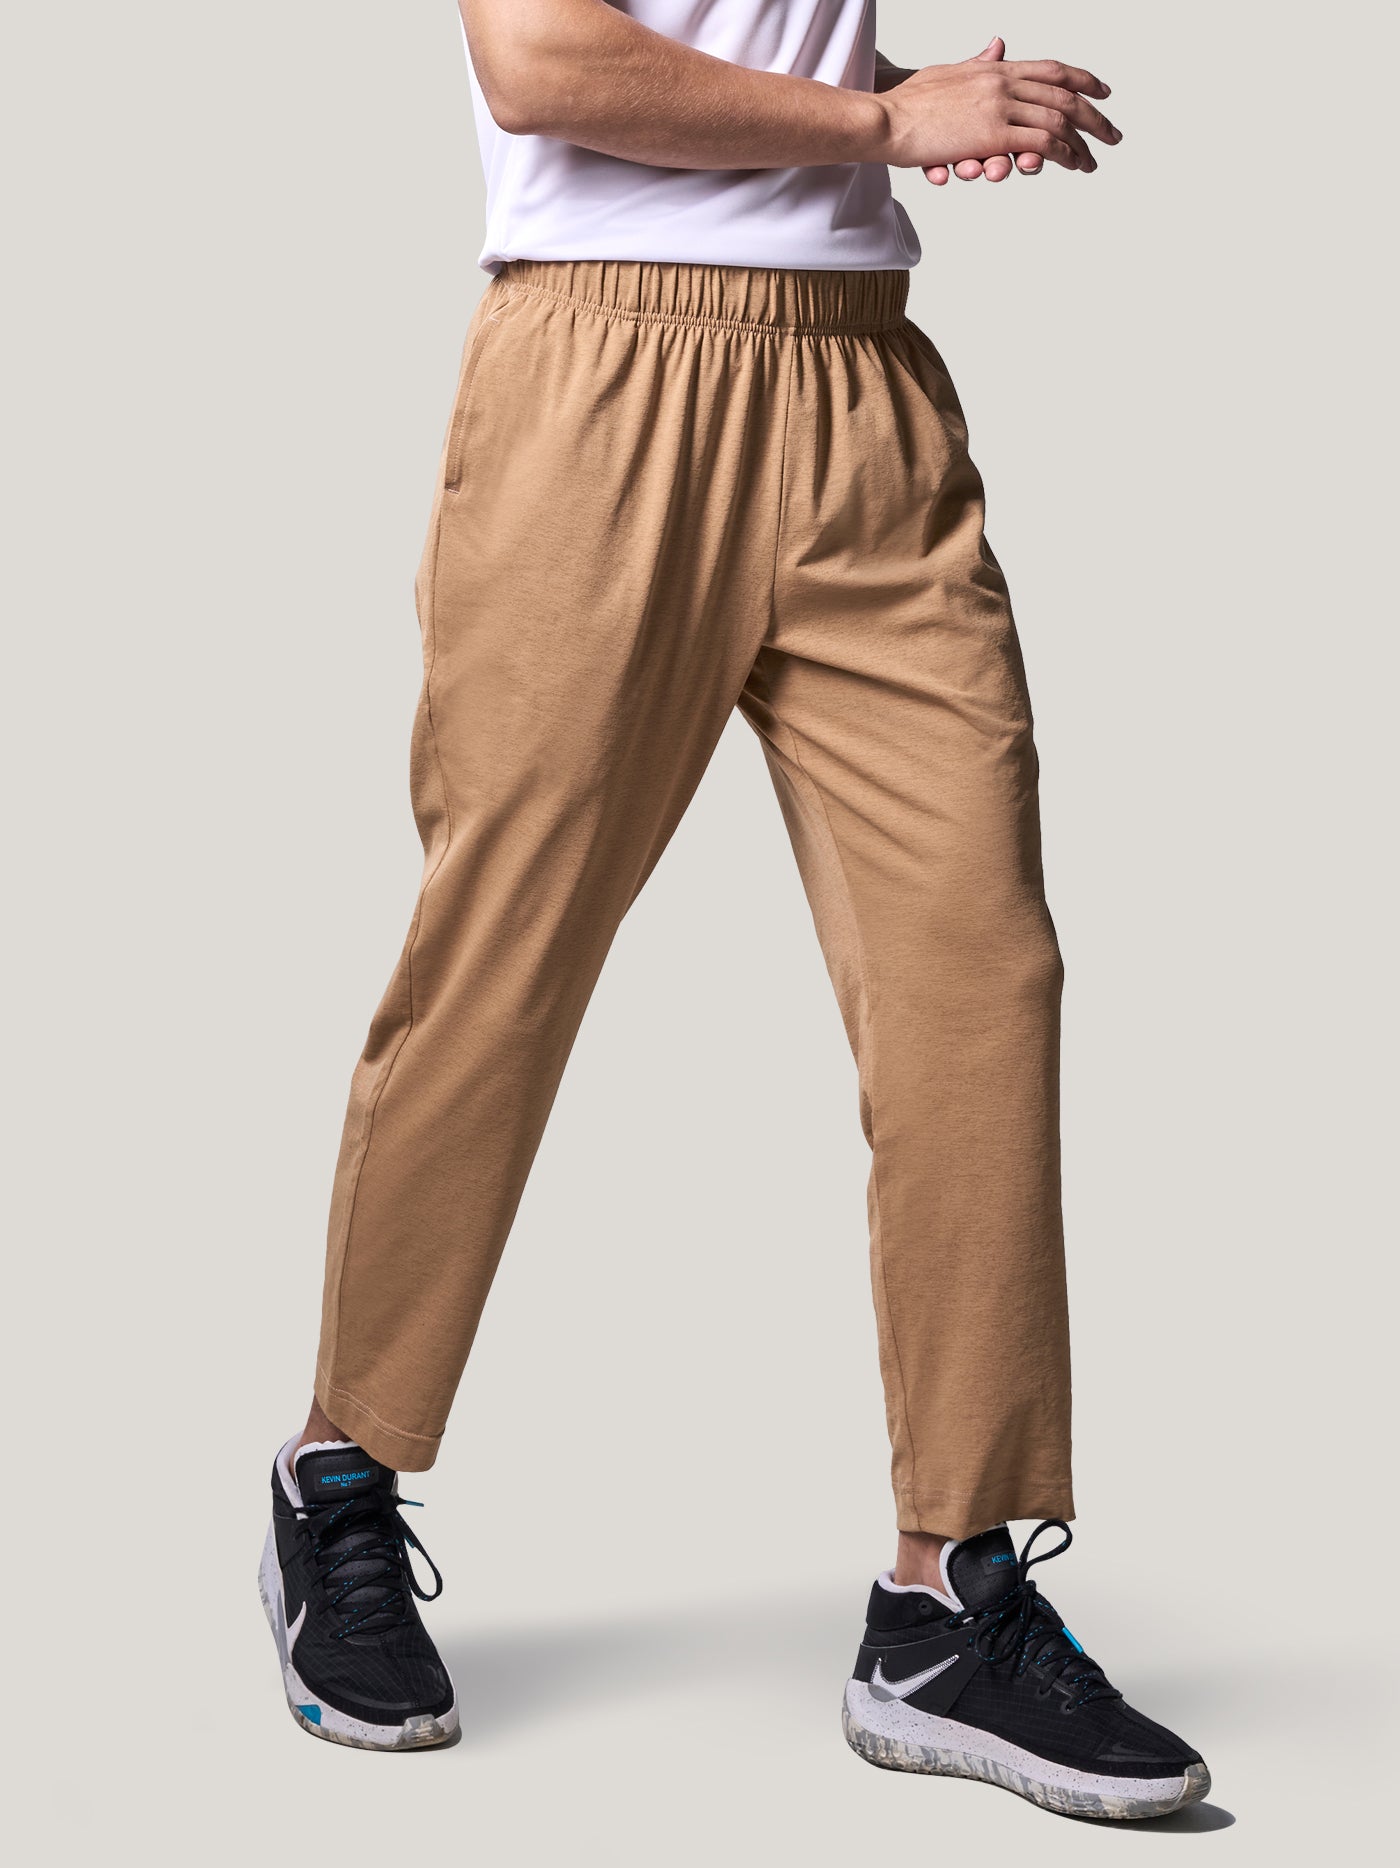 Gap | Ankle pants outfit, Mens outfits, Pants outfit men